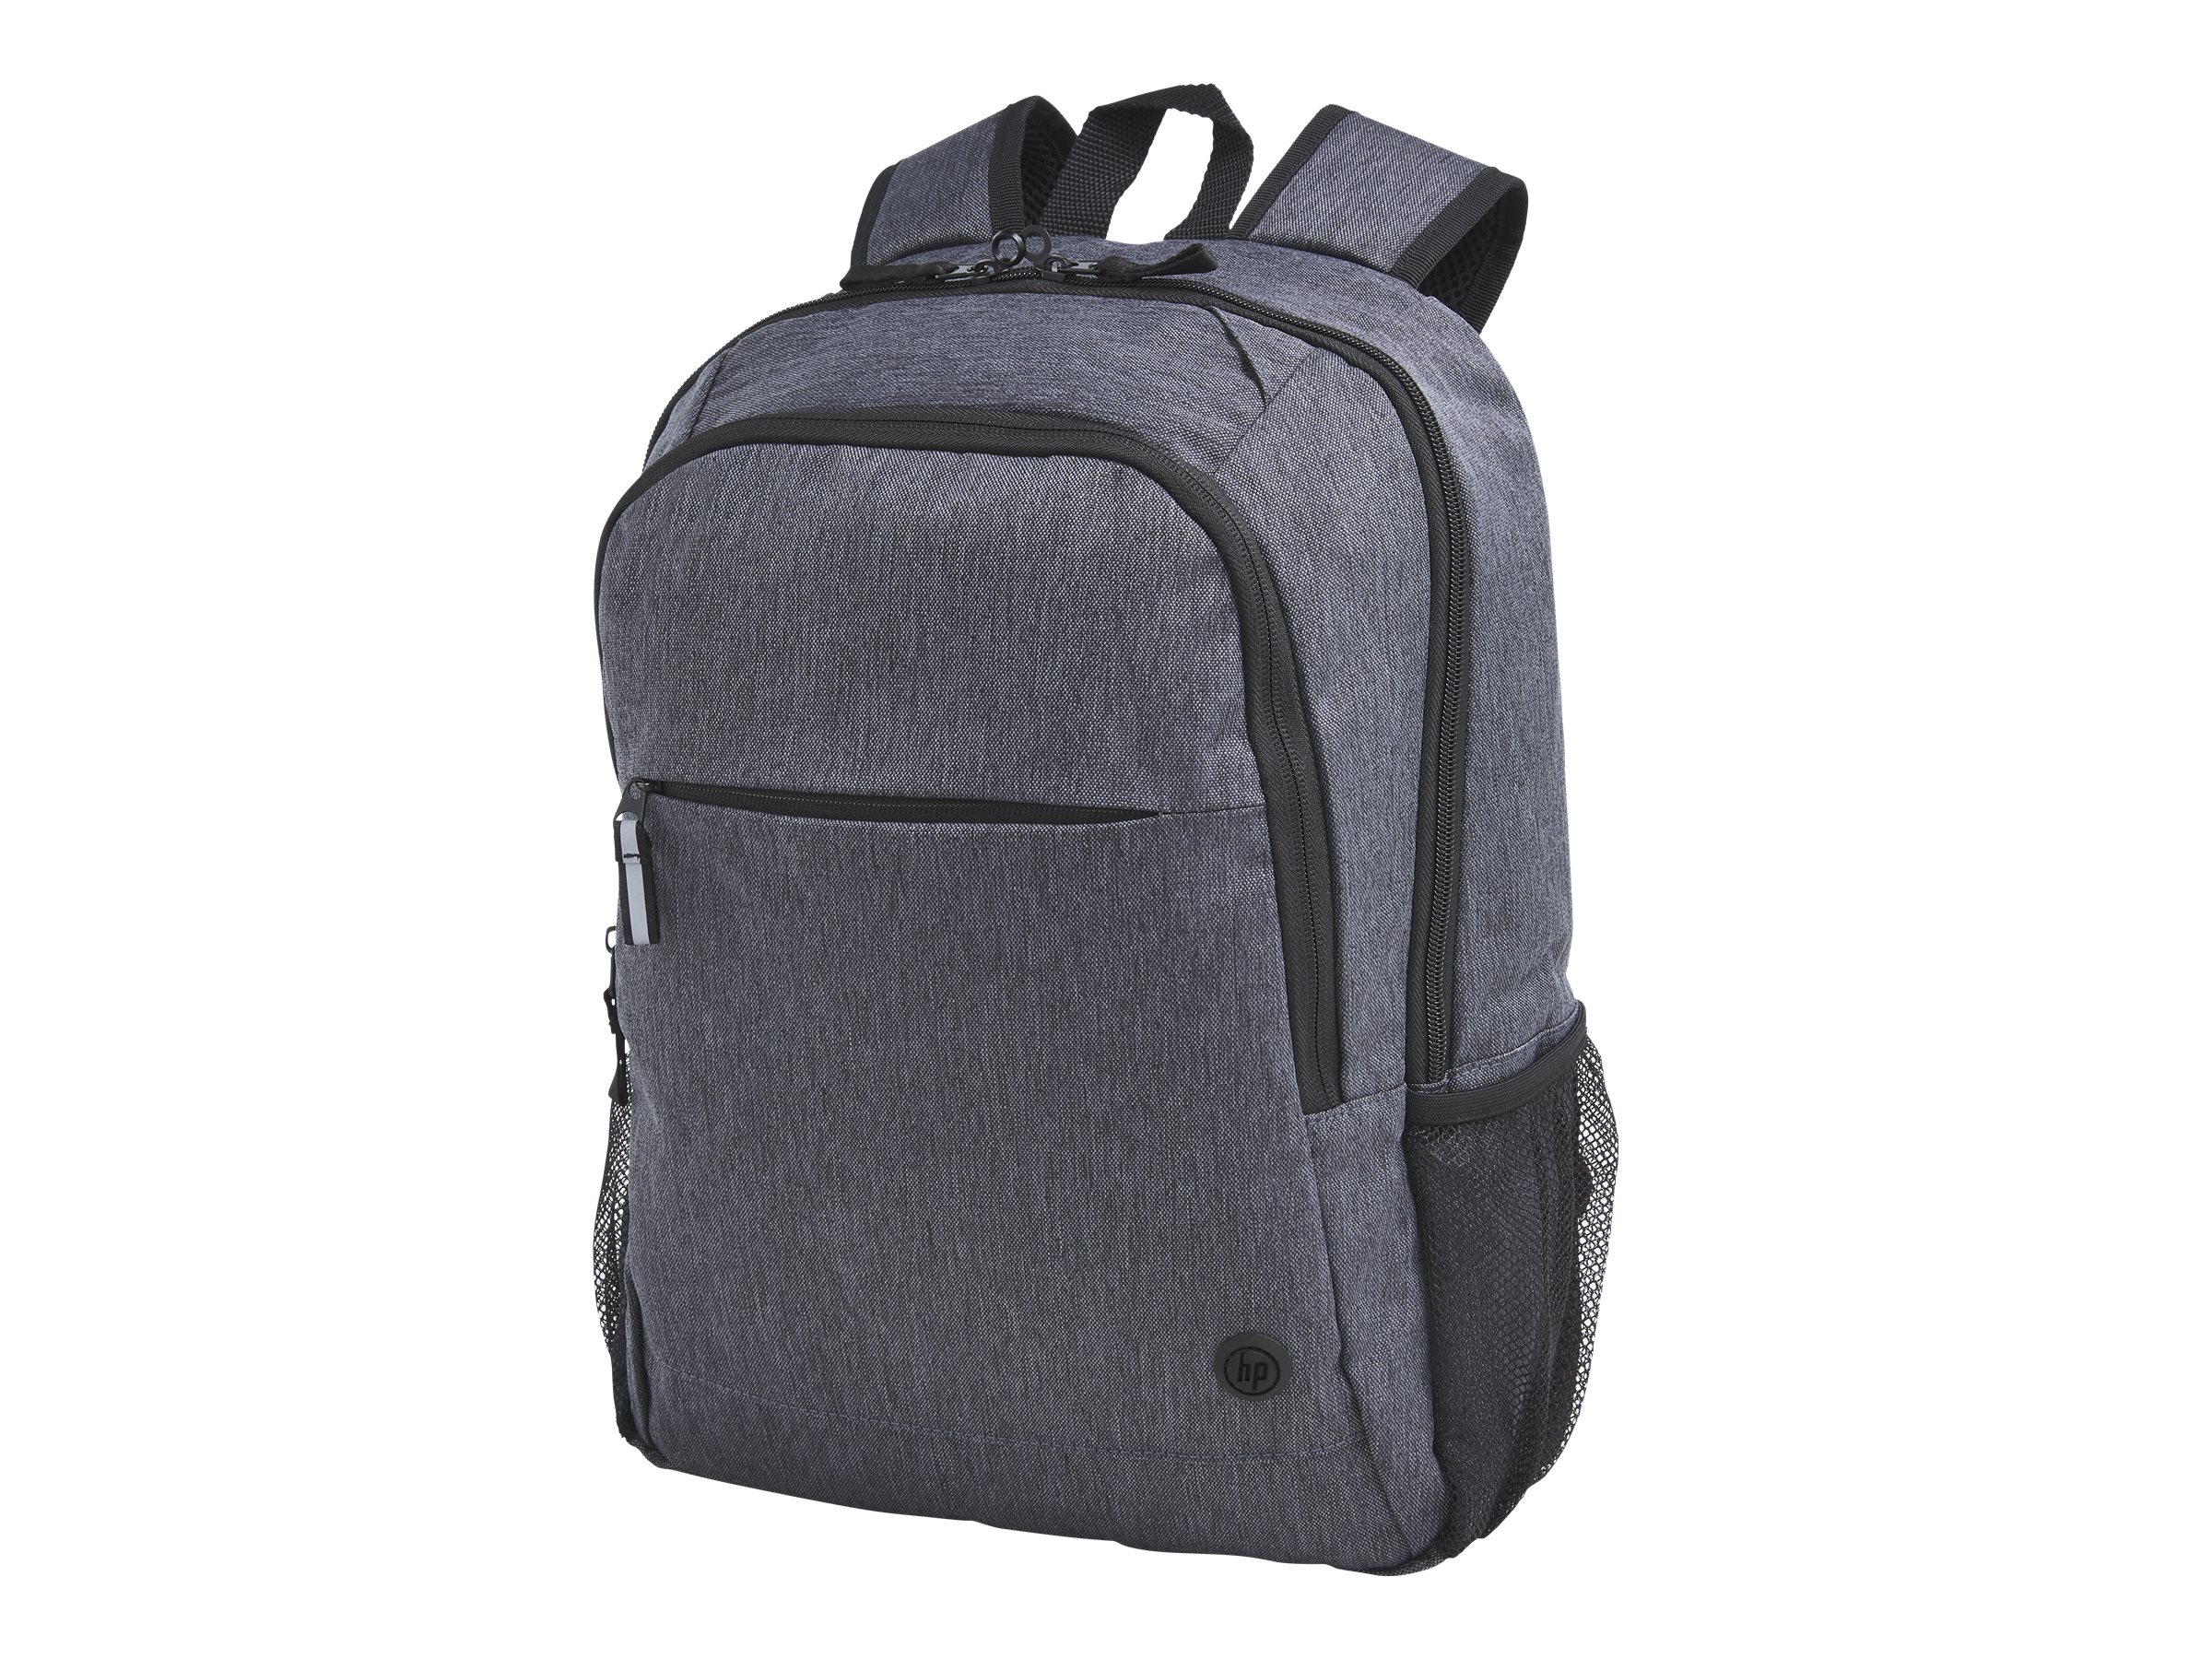 HP Prelude backpack carrying - Pro Notebook